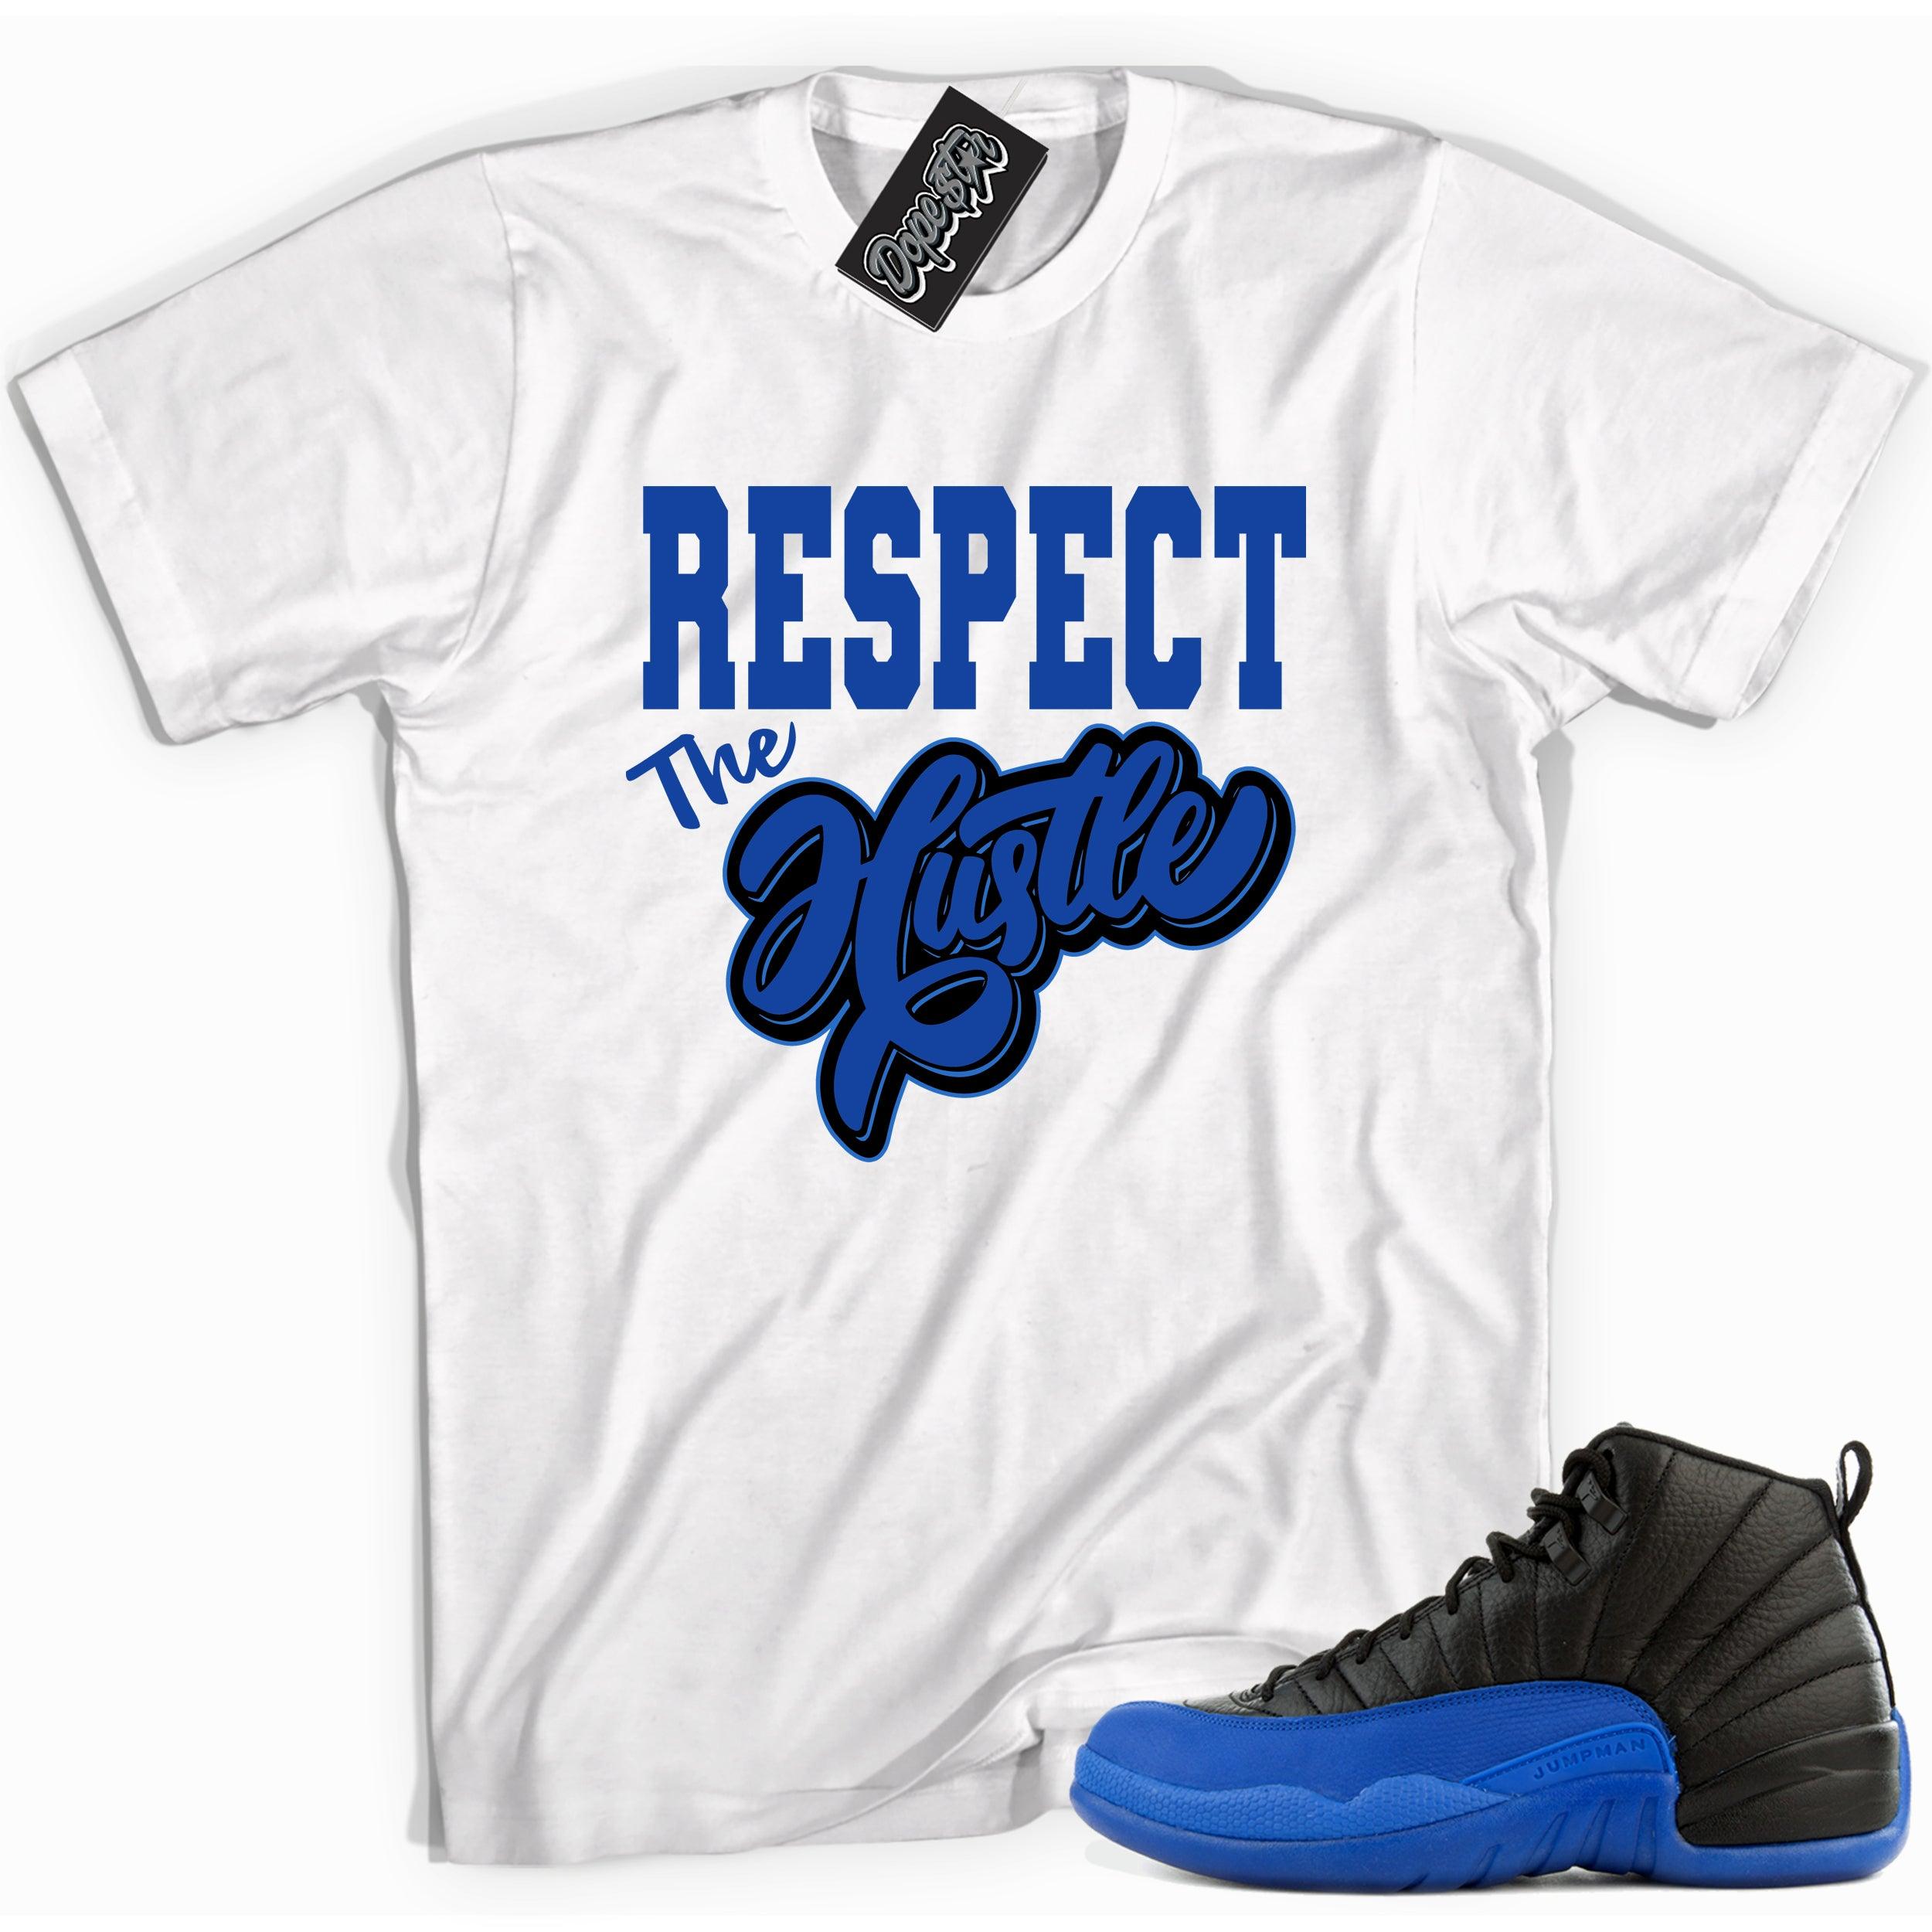 Cool white graphic tee with 'respect the hustle' print, that perfectly matches Air Jordan 12 Retro Black Game Royal sneakers.